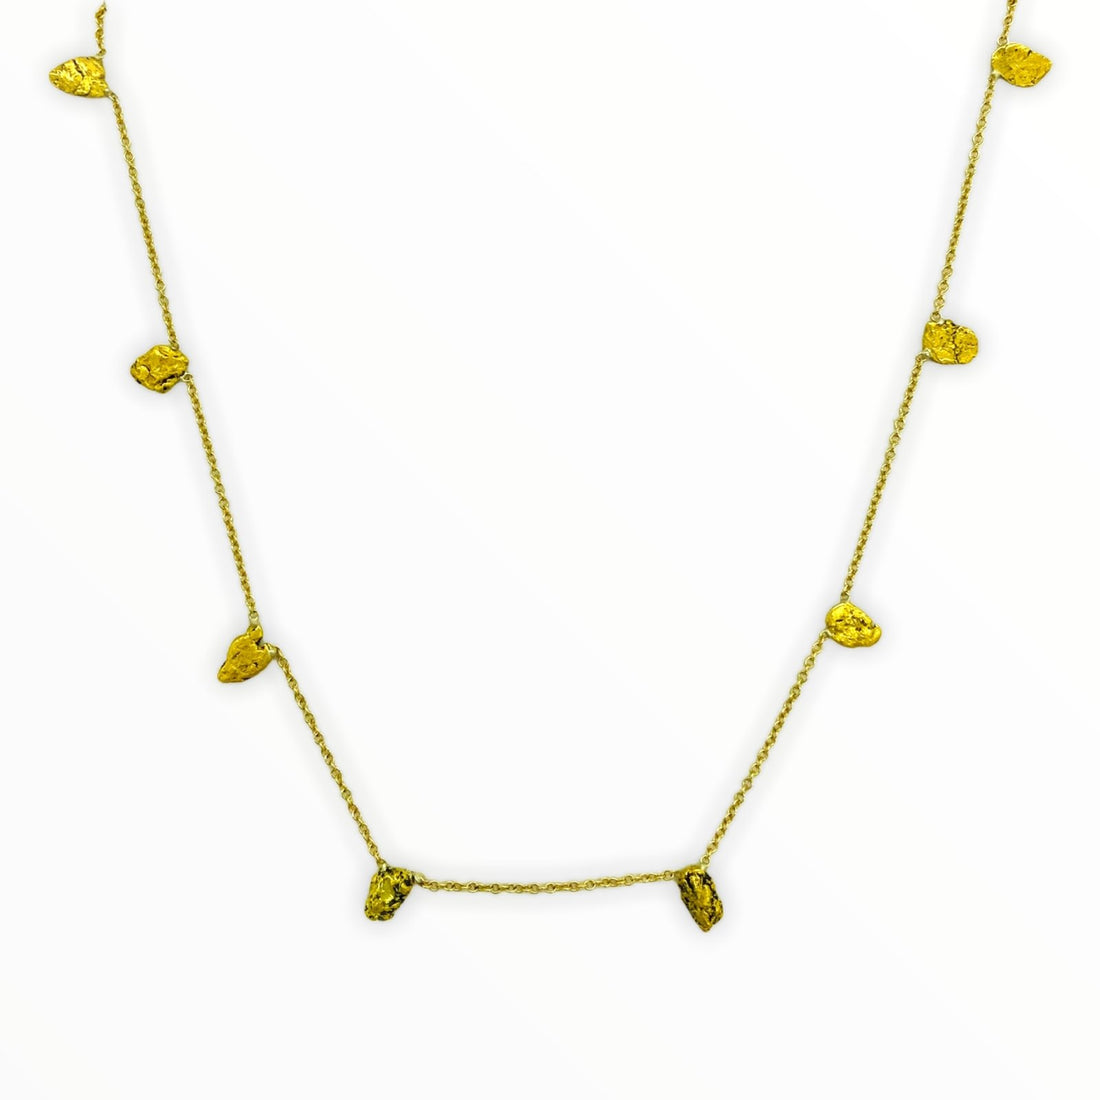 One of a Kind Gold Nugget Necklace - Ele Keats Jewelry